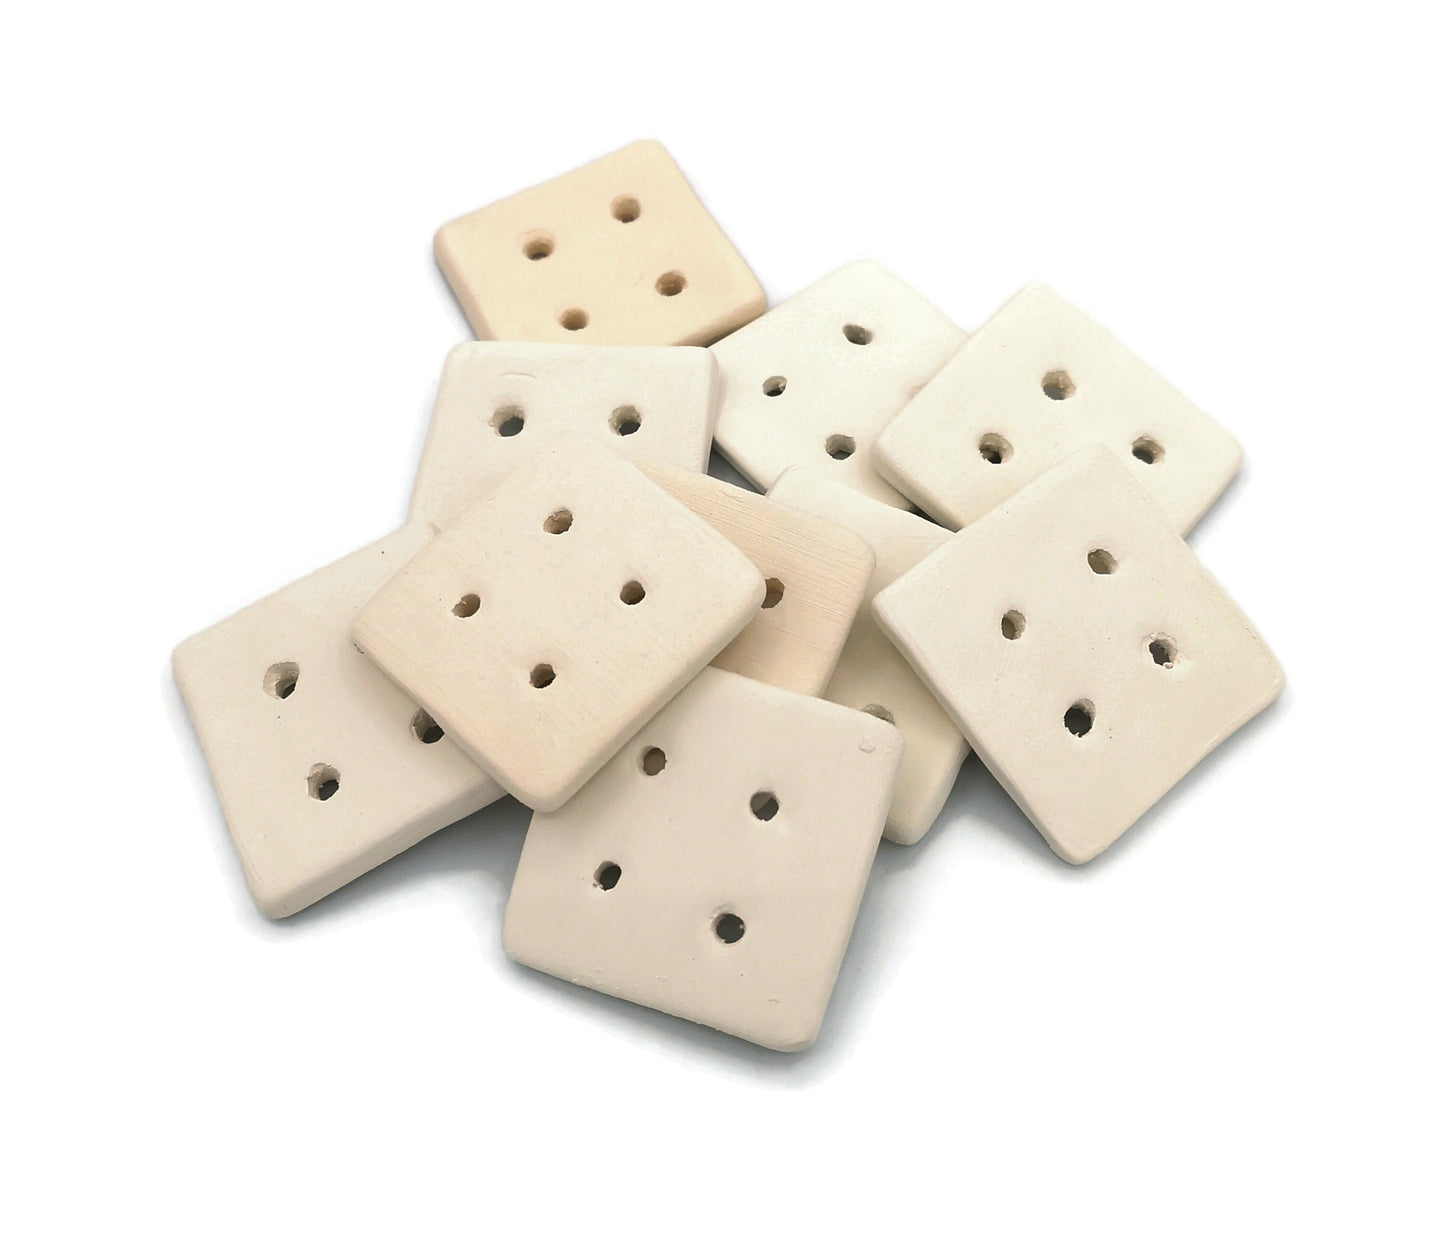 Blank Handmade Ceramic Bisque Sewing Buttons Ready To Paint, Square Unpainted Flat Button For Knitting, Novelty Customizable Buttons - Ceramica Ana Rafael